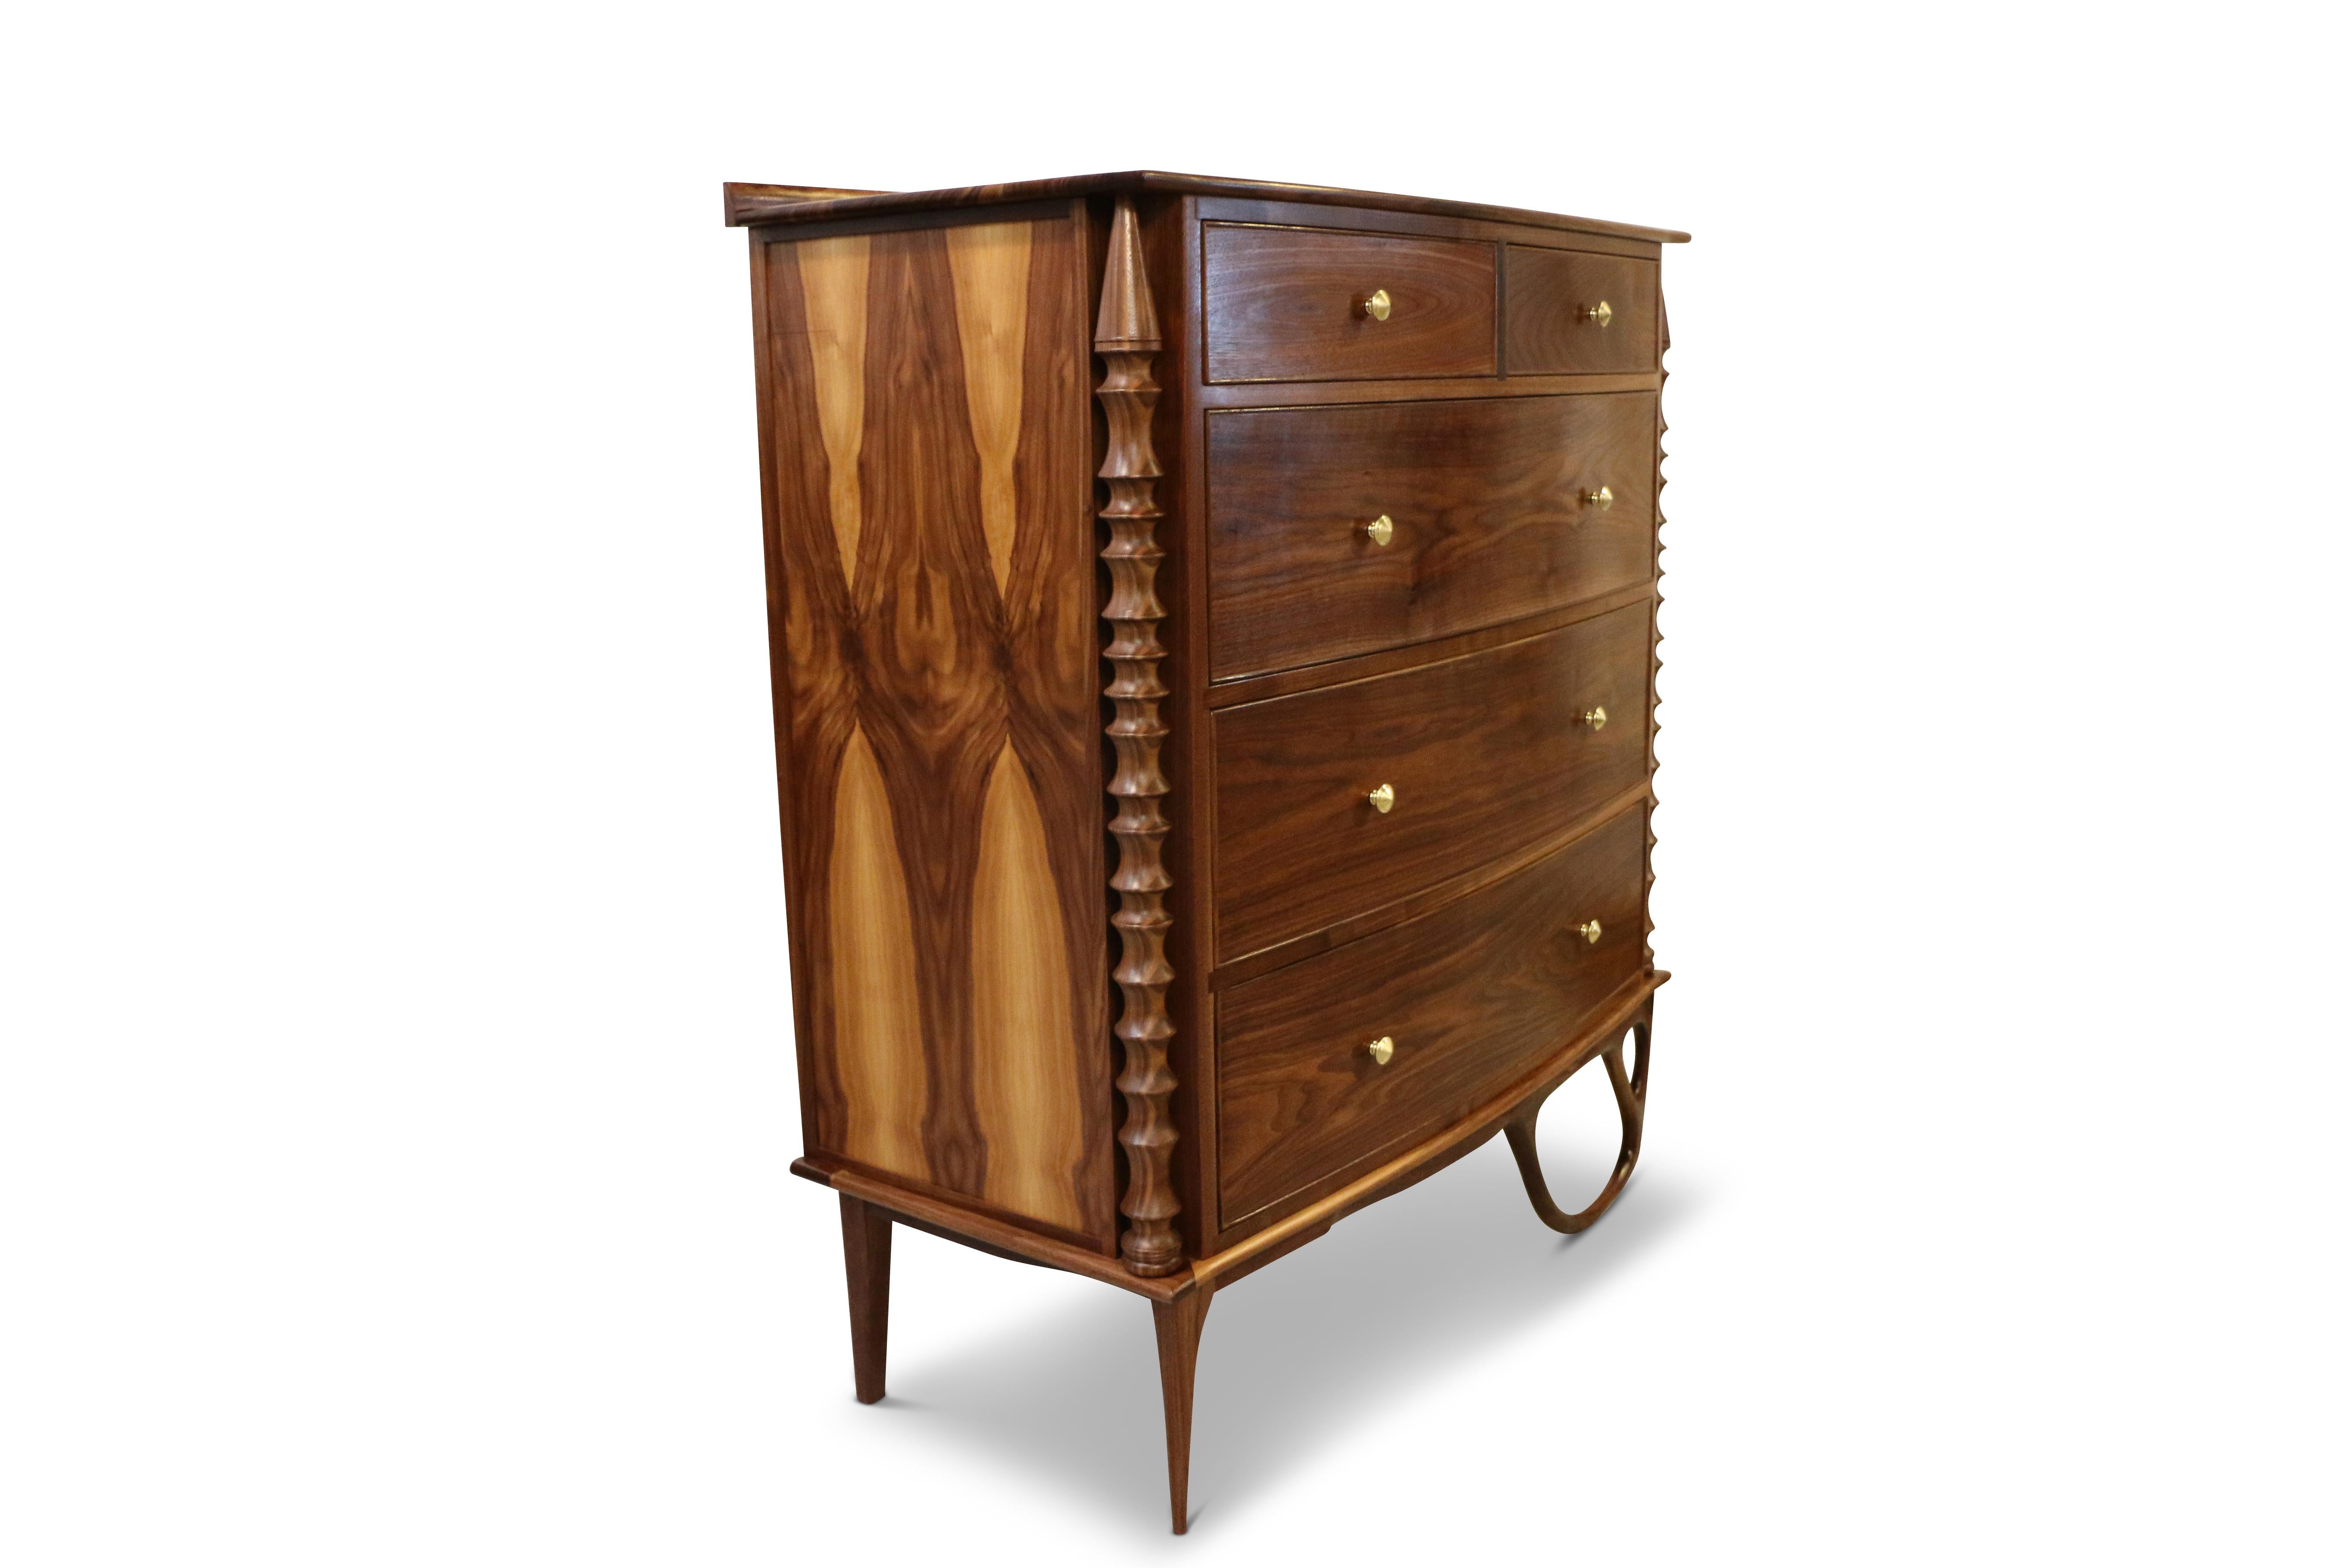 Designed and created by one of the most sought after custom fabricators in the country. J. Pickens’ works are eye-catching statements that are grounded in traditional techniques ,but live in a world all their own. This dresser incorporates a blend